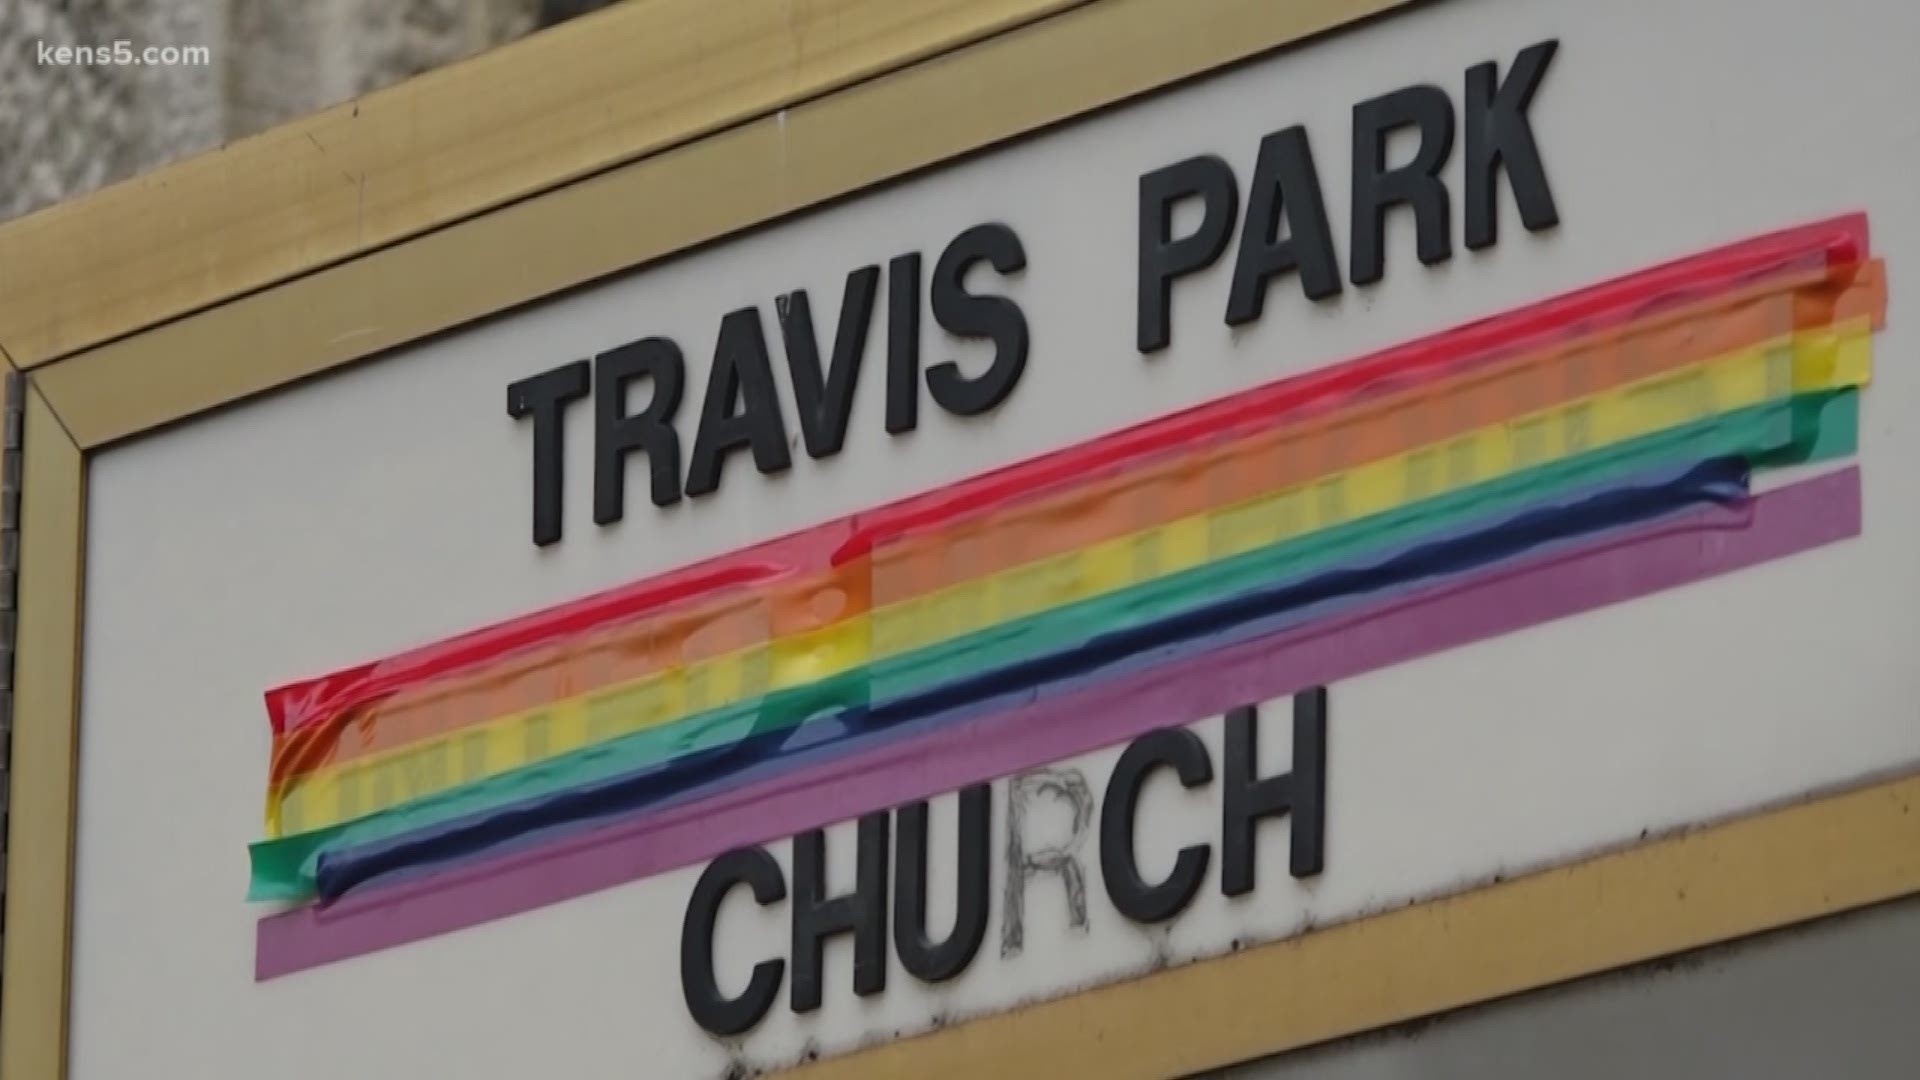 History is happening at Travis Park Church as they announce they will now be holding same-sex marriages.